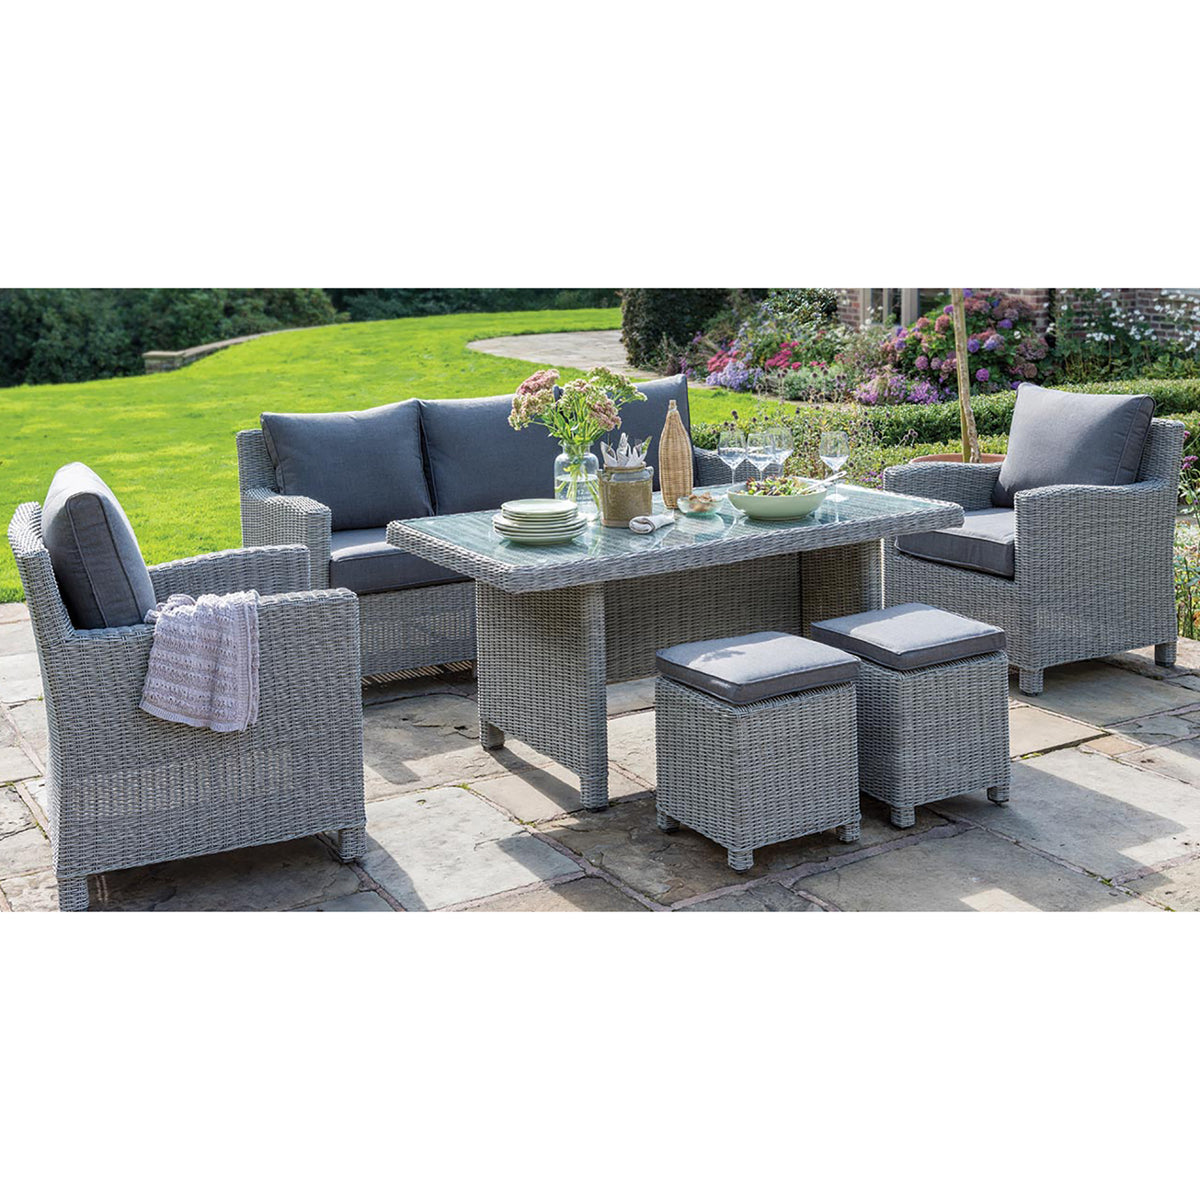 Kettler Palma Signature White Wash Wicker Outdoor Casual Dining Lounge Sofa Set